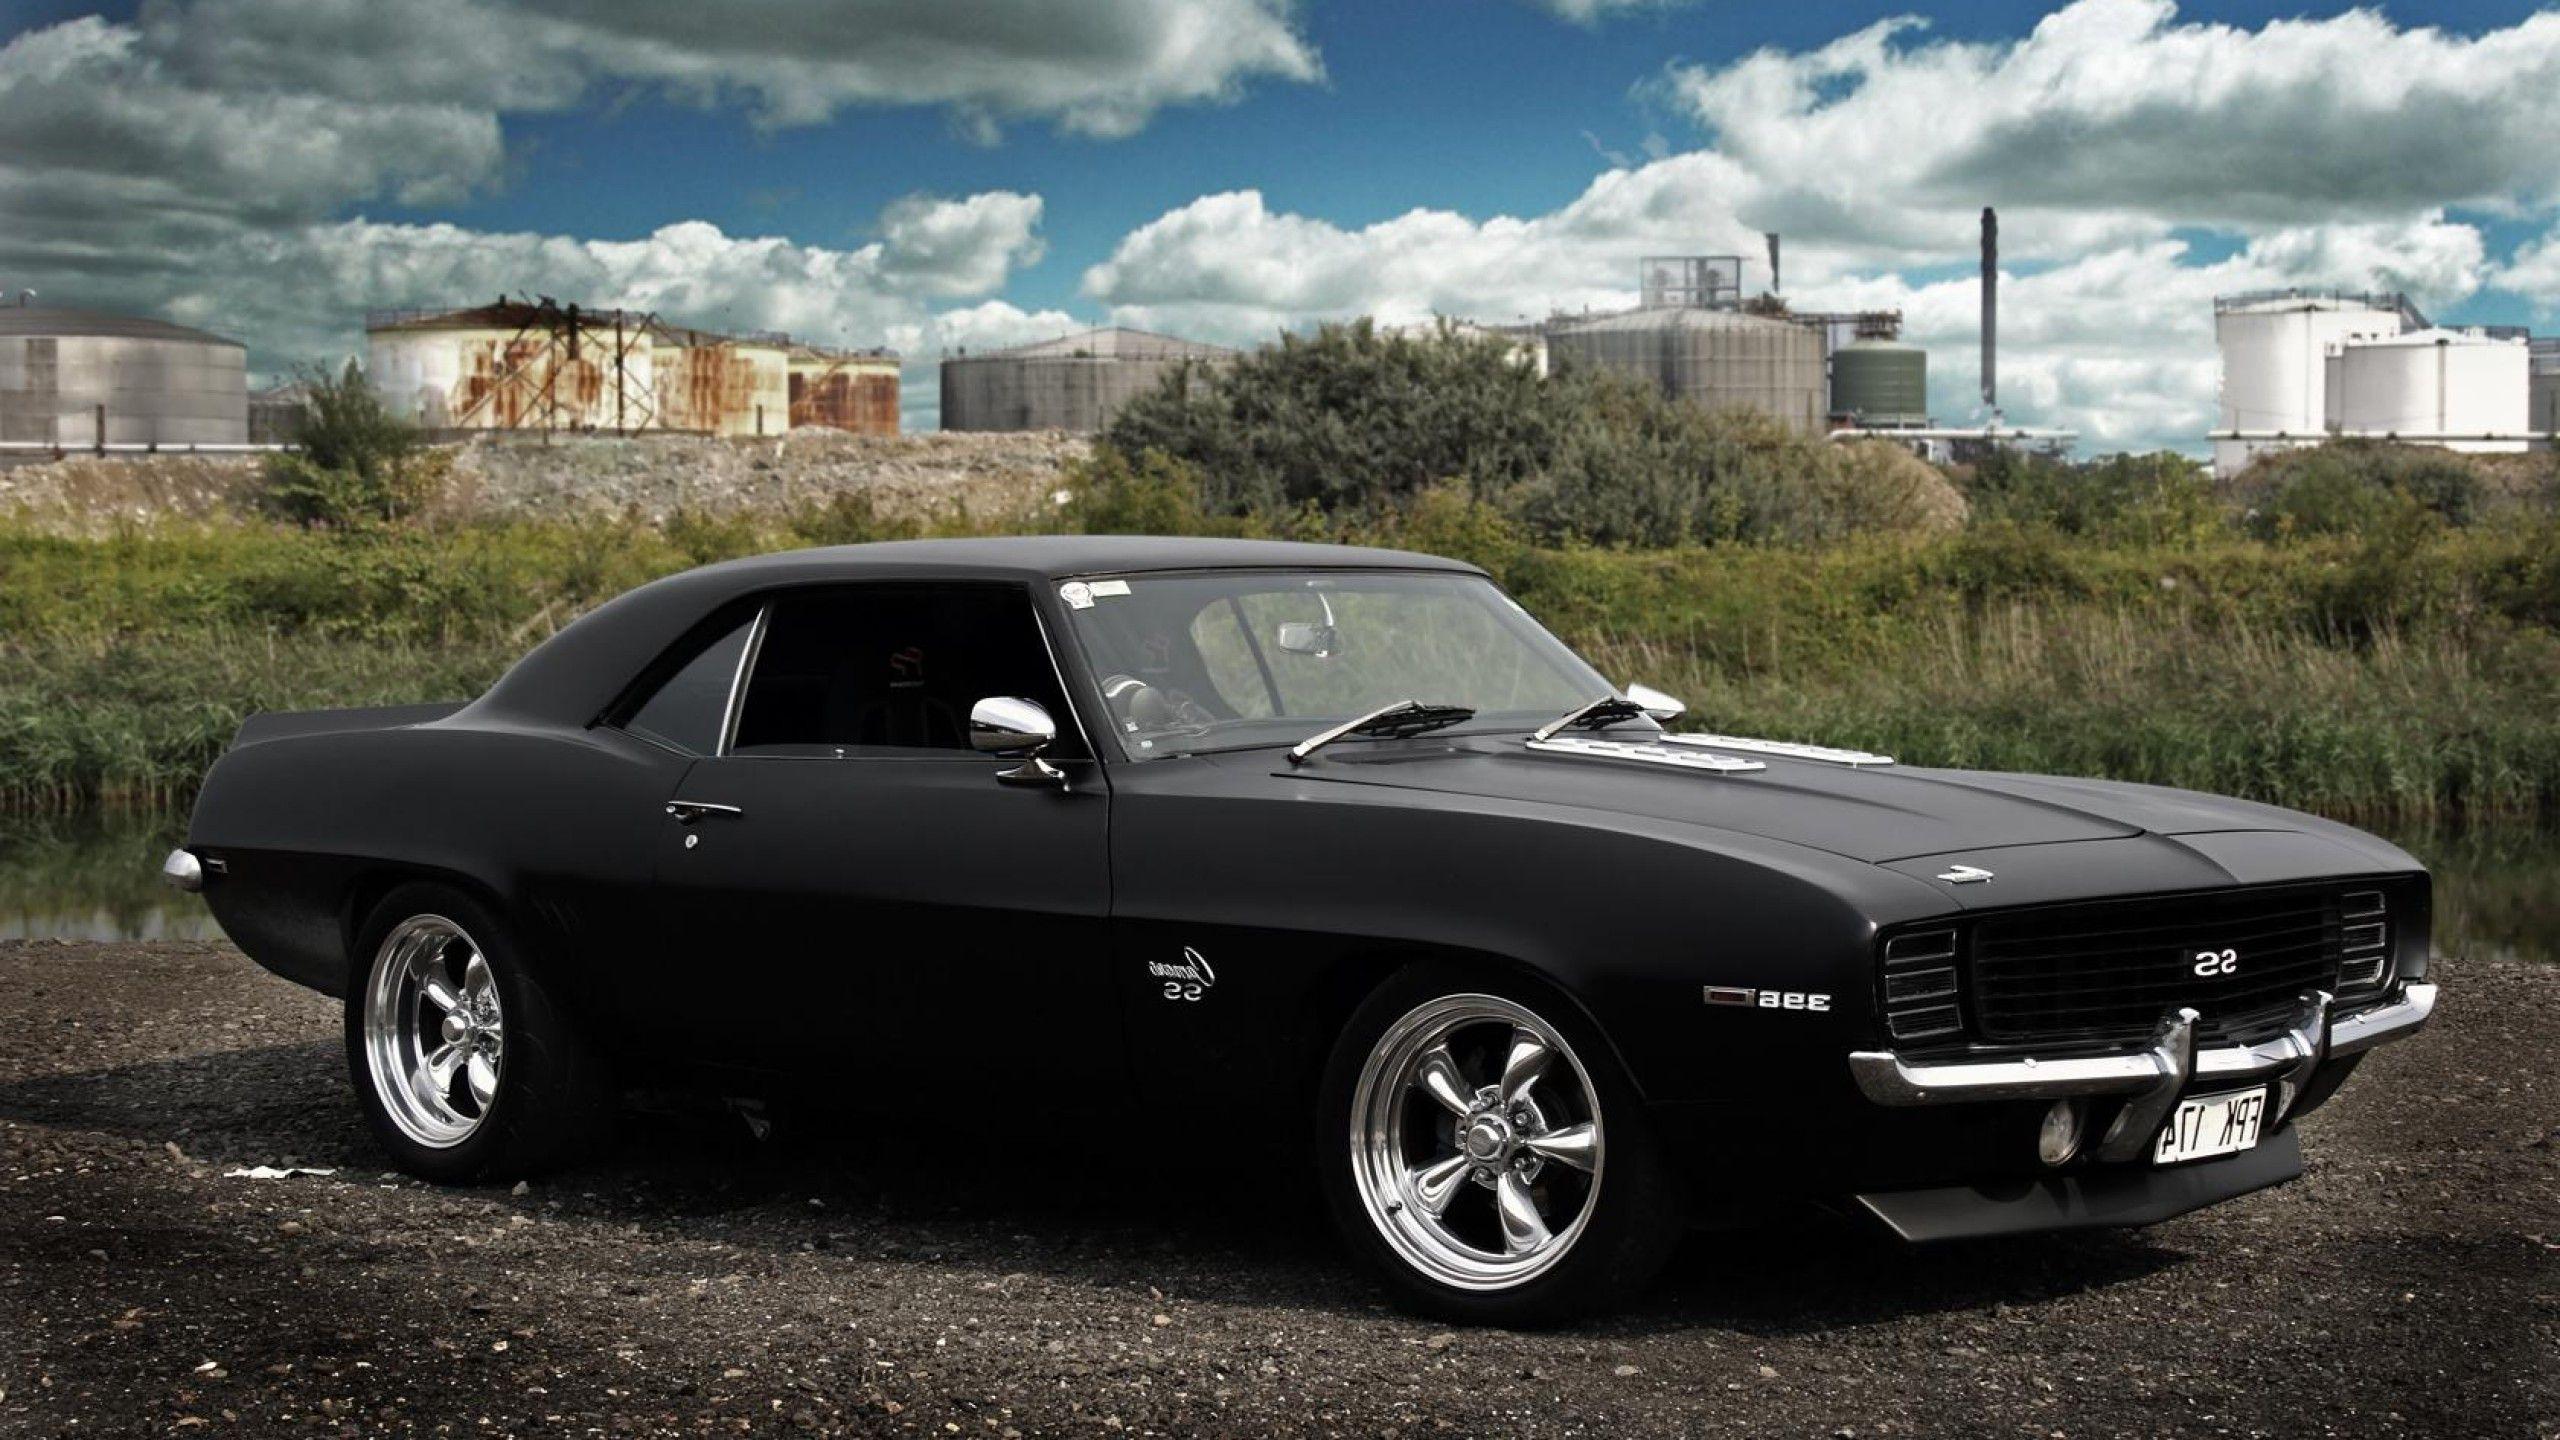 Resume, Muscle car wallpaper for laptop. muscle cars